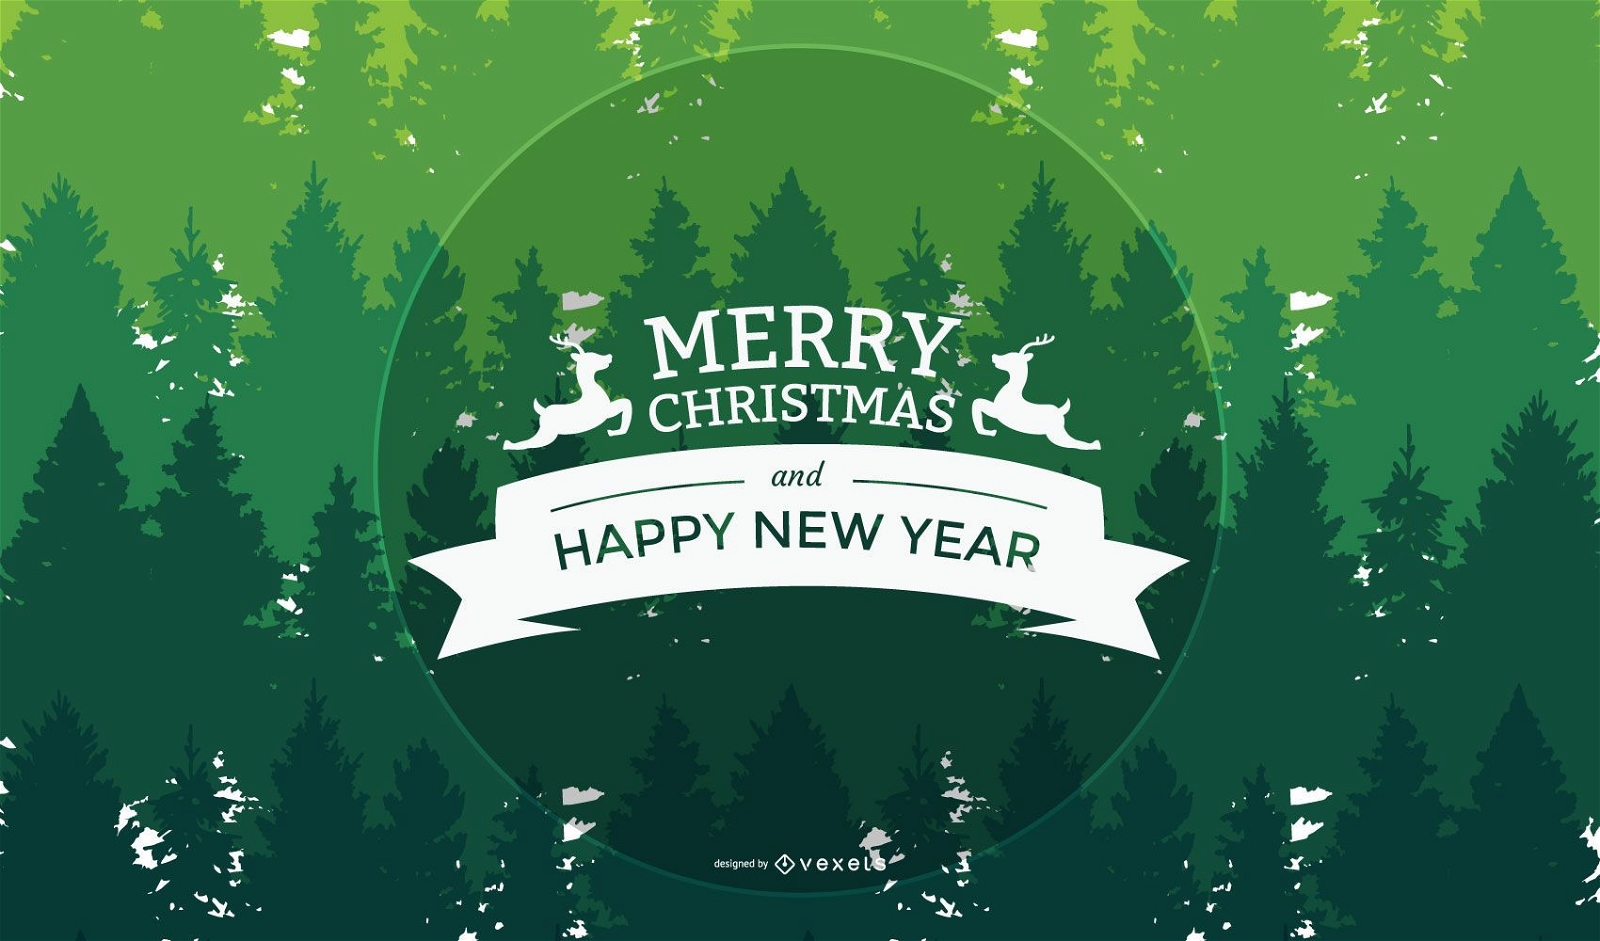 Xmas & New Year Greeting on Green Trees Background